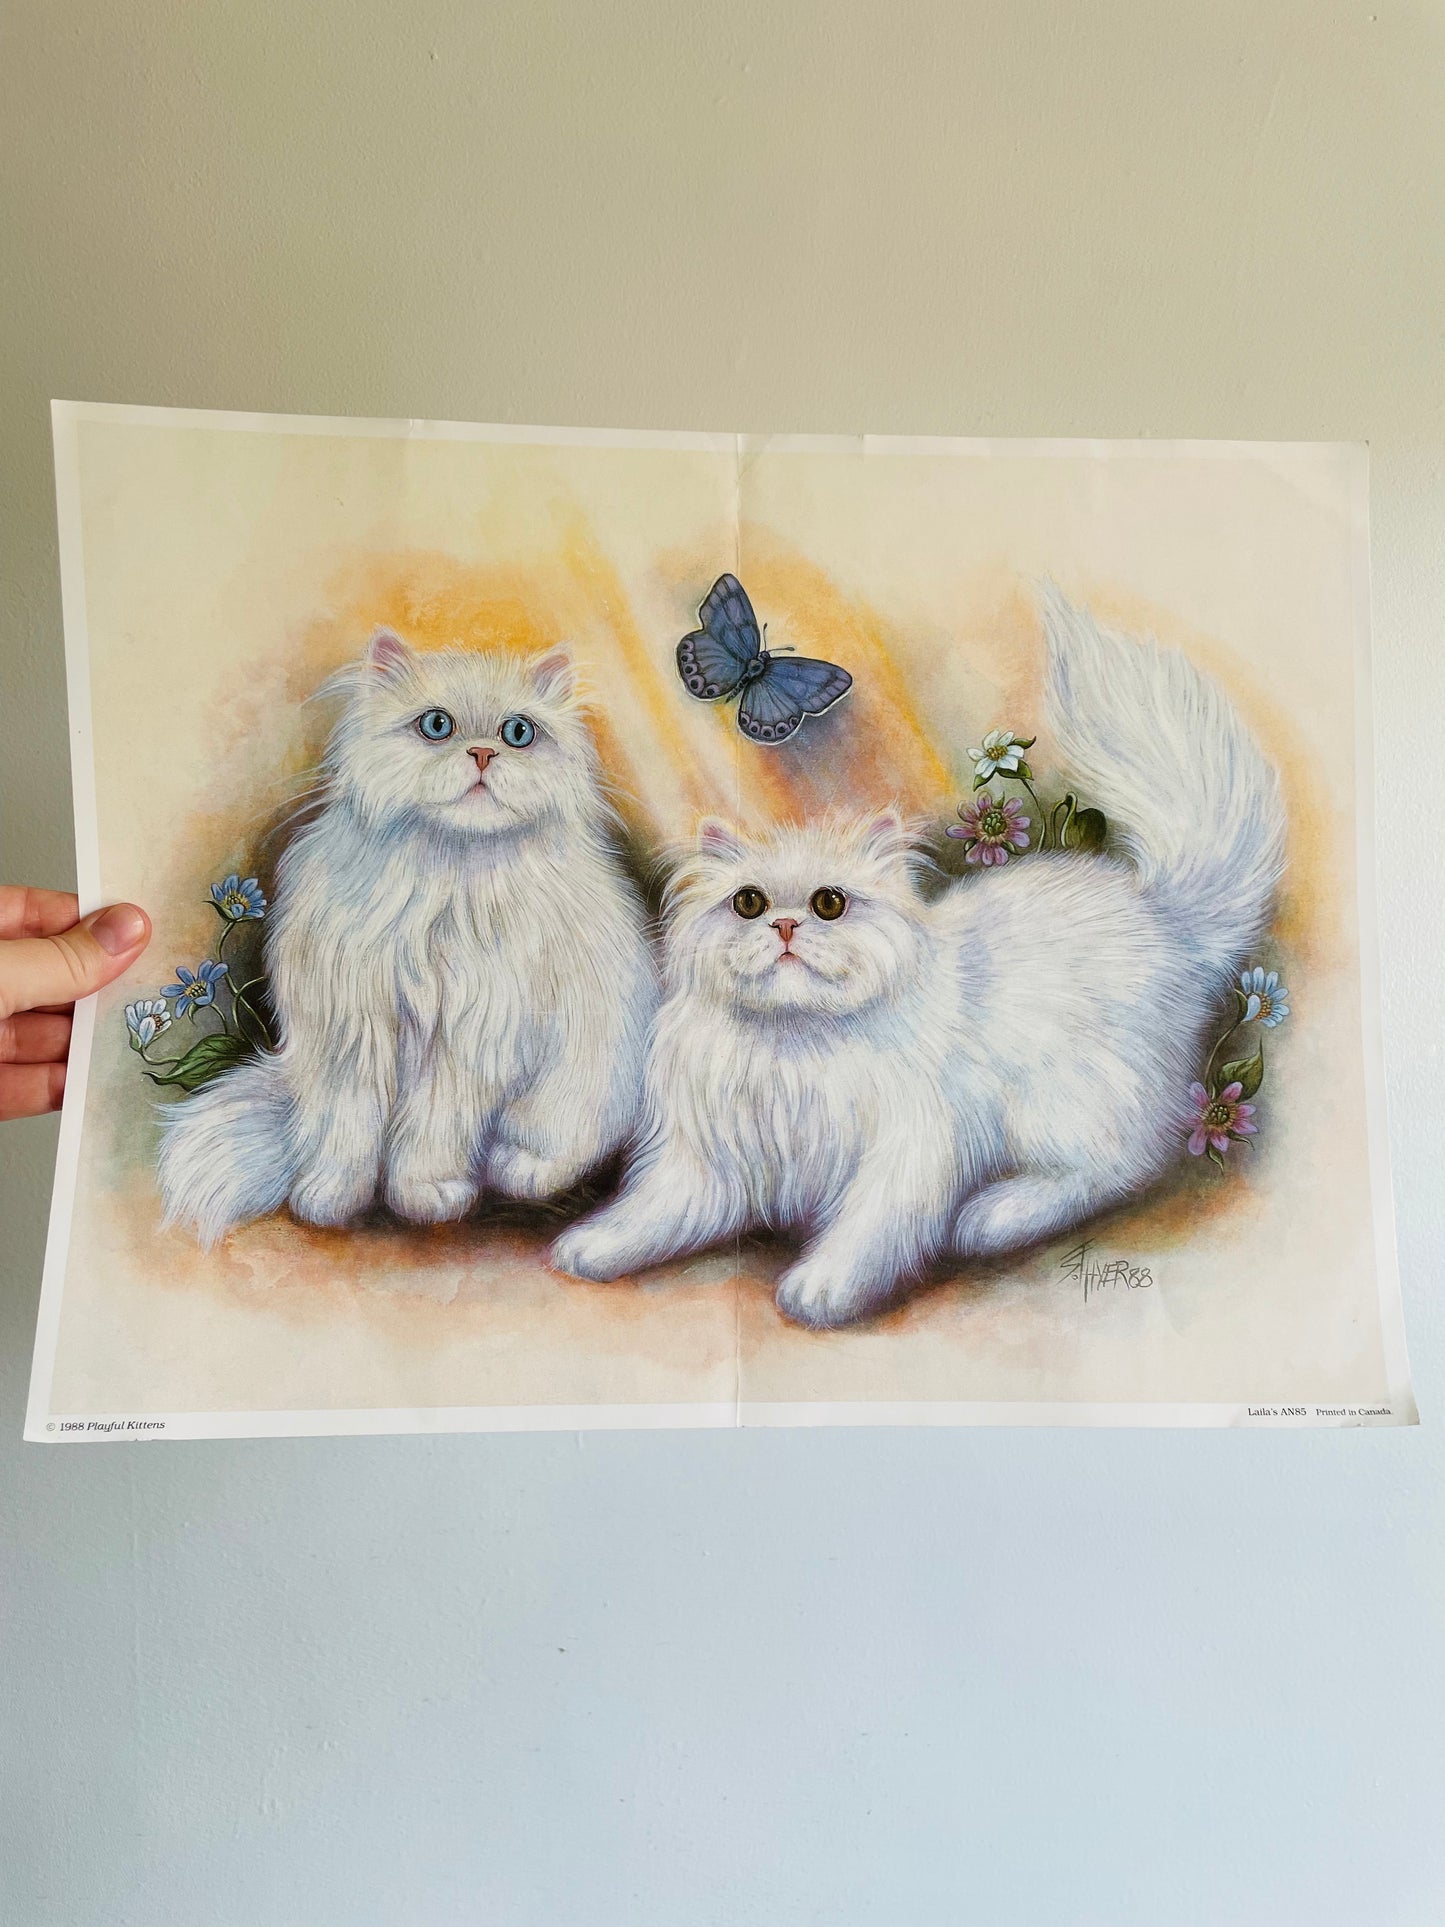 Playful Kittens Poster Print - Ready for Framing! Printed in Canada (1988)